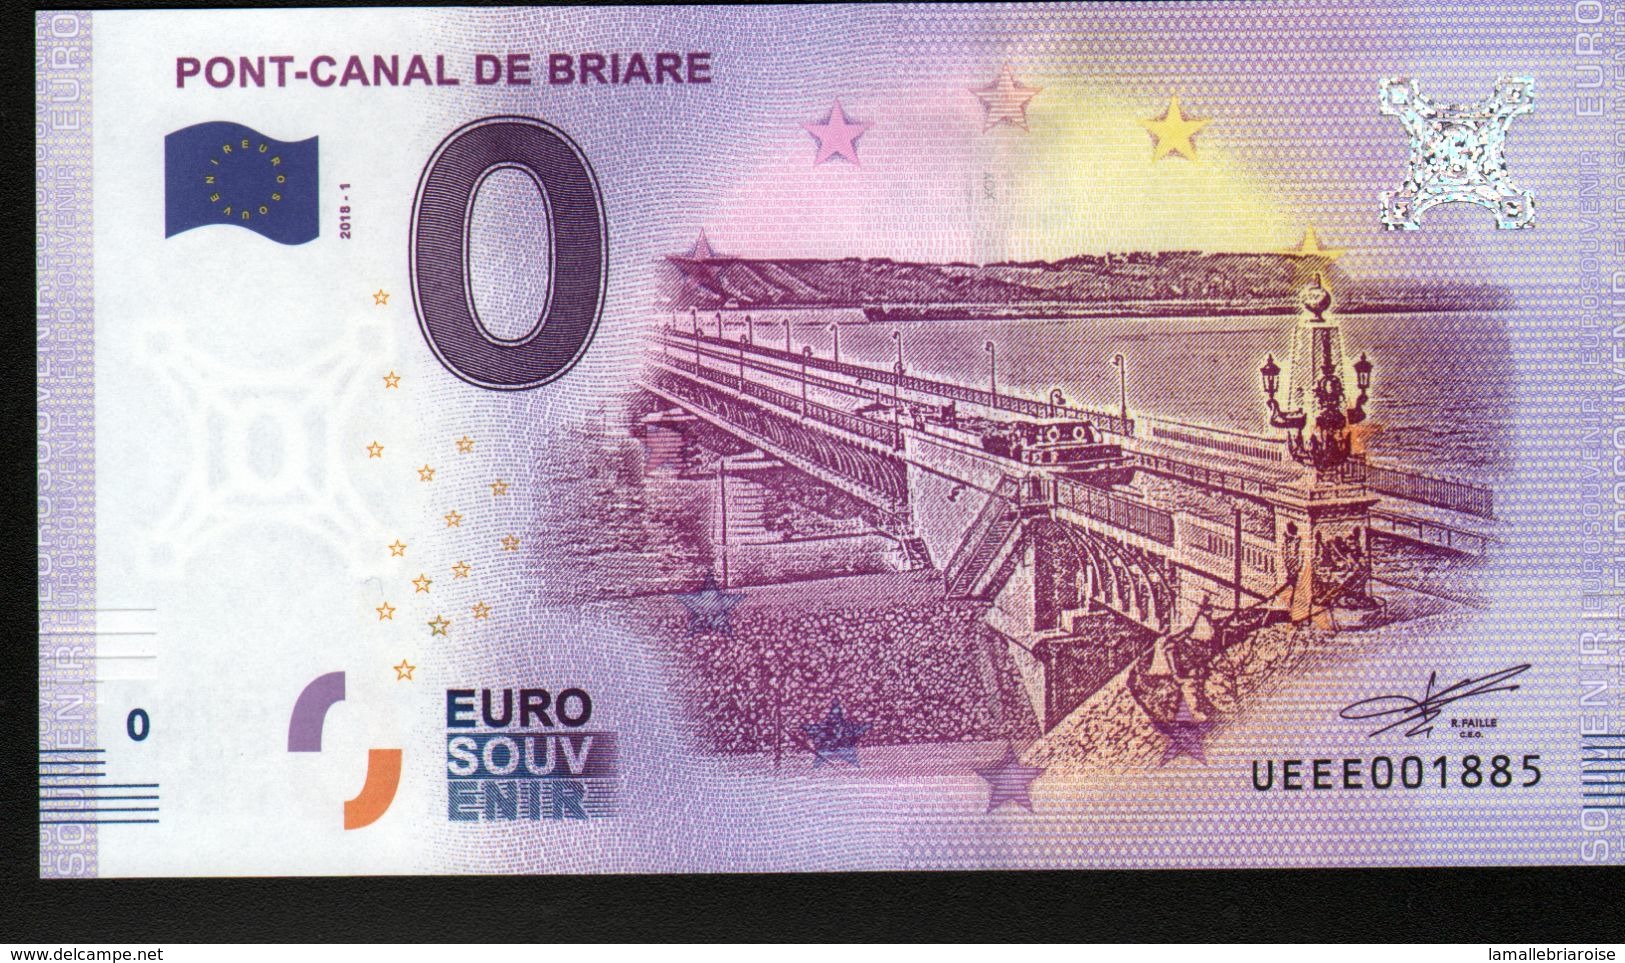 France - Billet Touristique 0 Euro 2018 N° 1885 (UEEE001885/5000) - PONT-CANAL DE BRIARE - Private Proofs / Unofficial